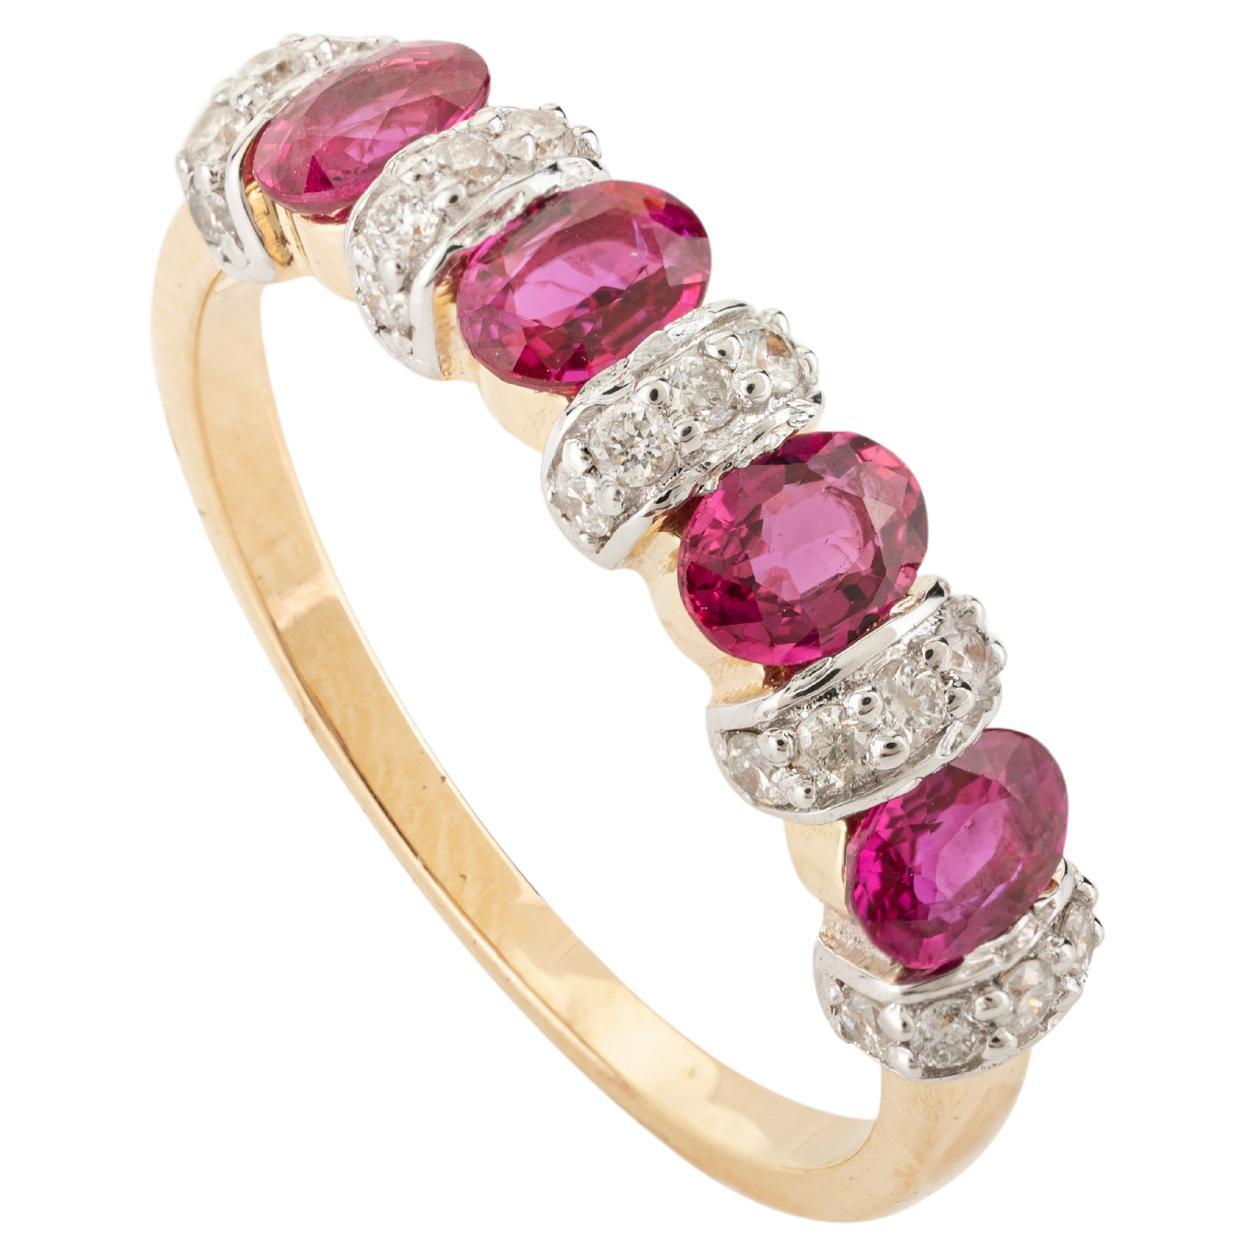 For Sale:  Alternate Ruby and Diamond Half Eternity Engagement Band in 18k Yellow Gold